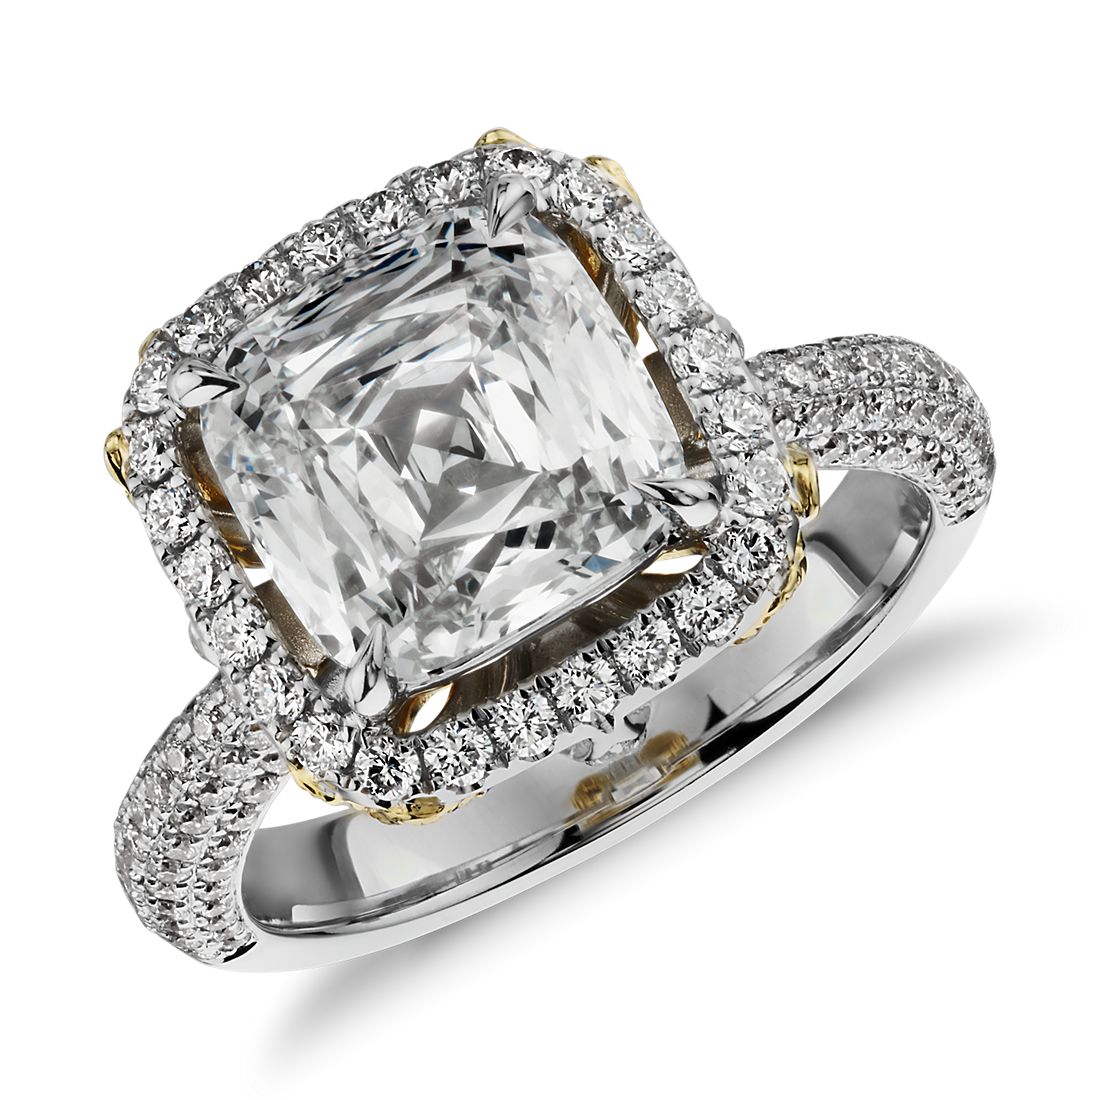 Modern Cushion and Pavé Diamond Halo Ring in 18k White Gold (4.74 ct. tw.)